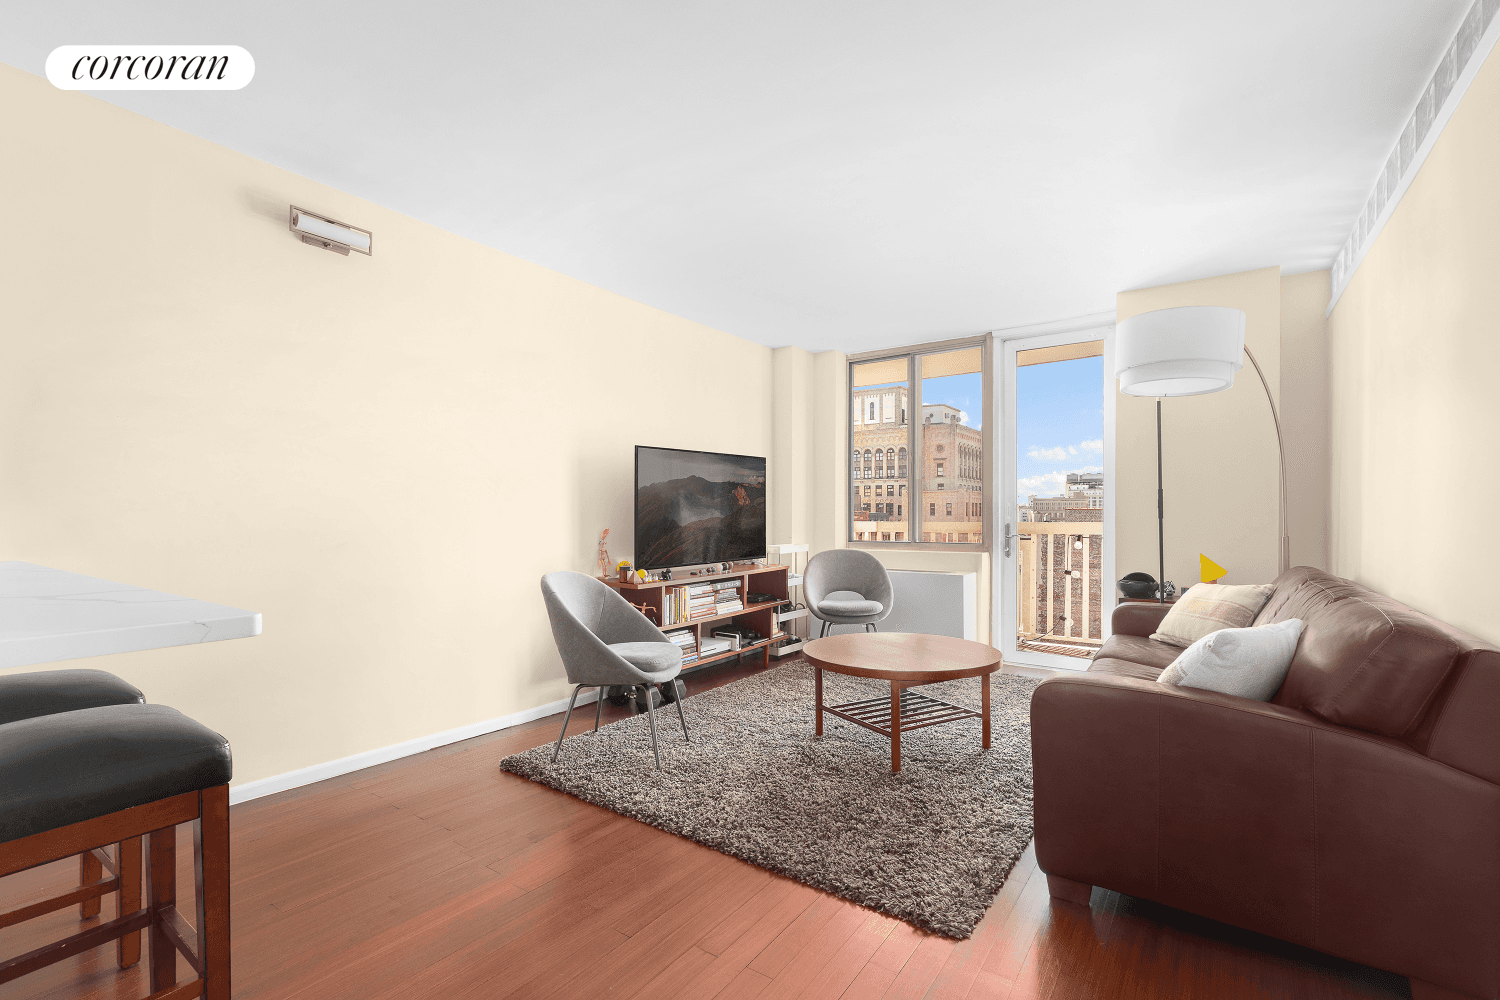 Located at 50 Lexington Avenue, this elegant high floor south facing 1 bed, 1 bath home within a full service building, features a private balcony for serene outdoor moments.